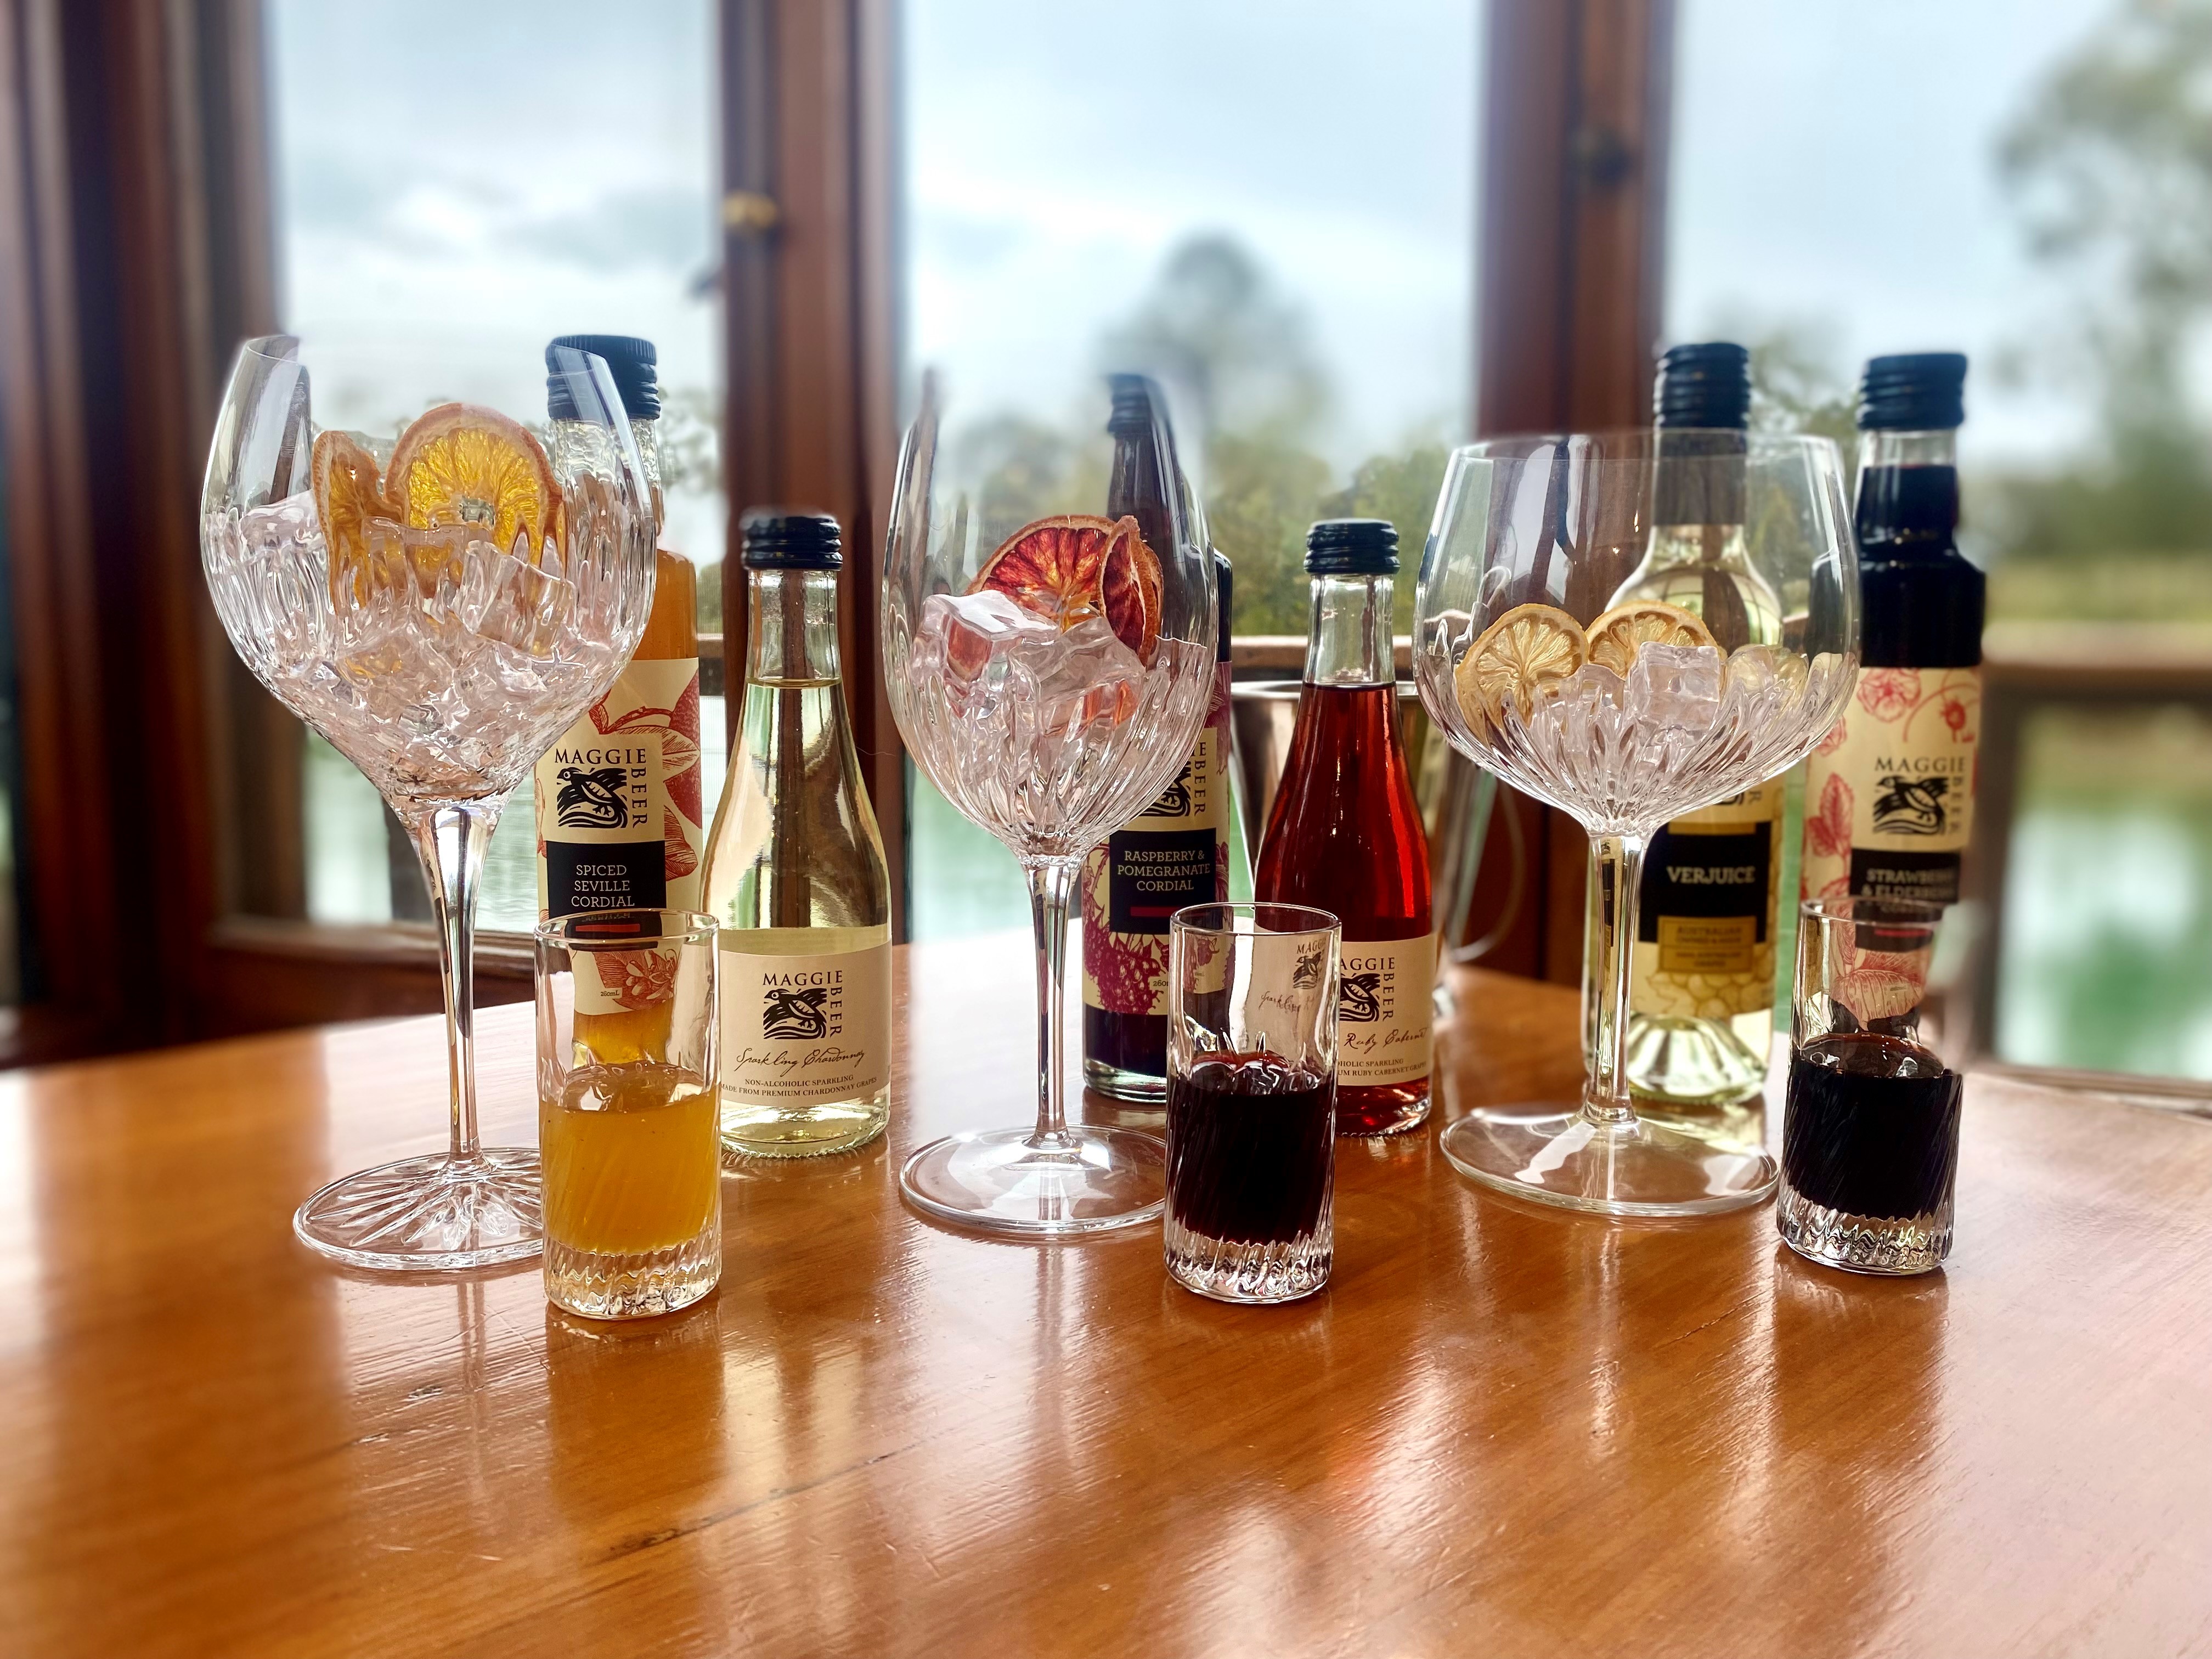 Maggie Beer’s Farmshop – Mocktail Creating Experience 